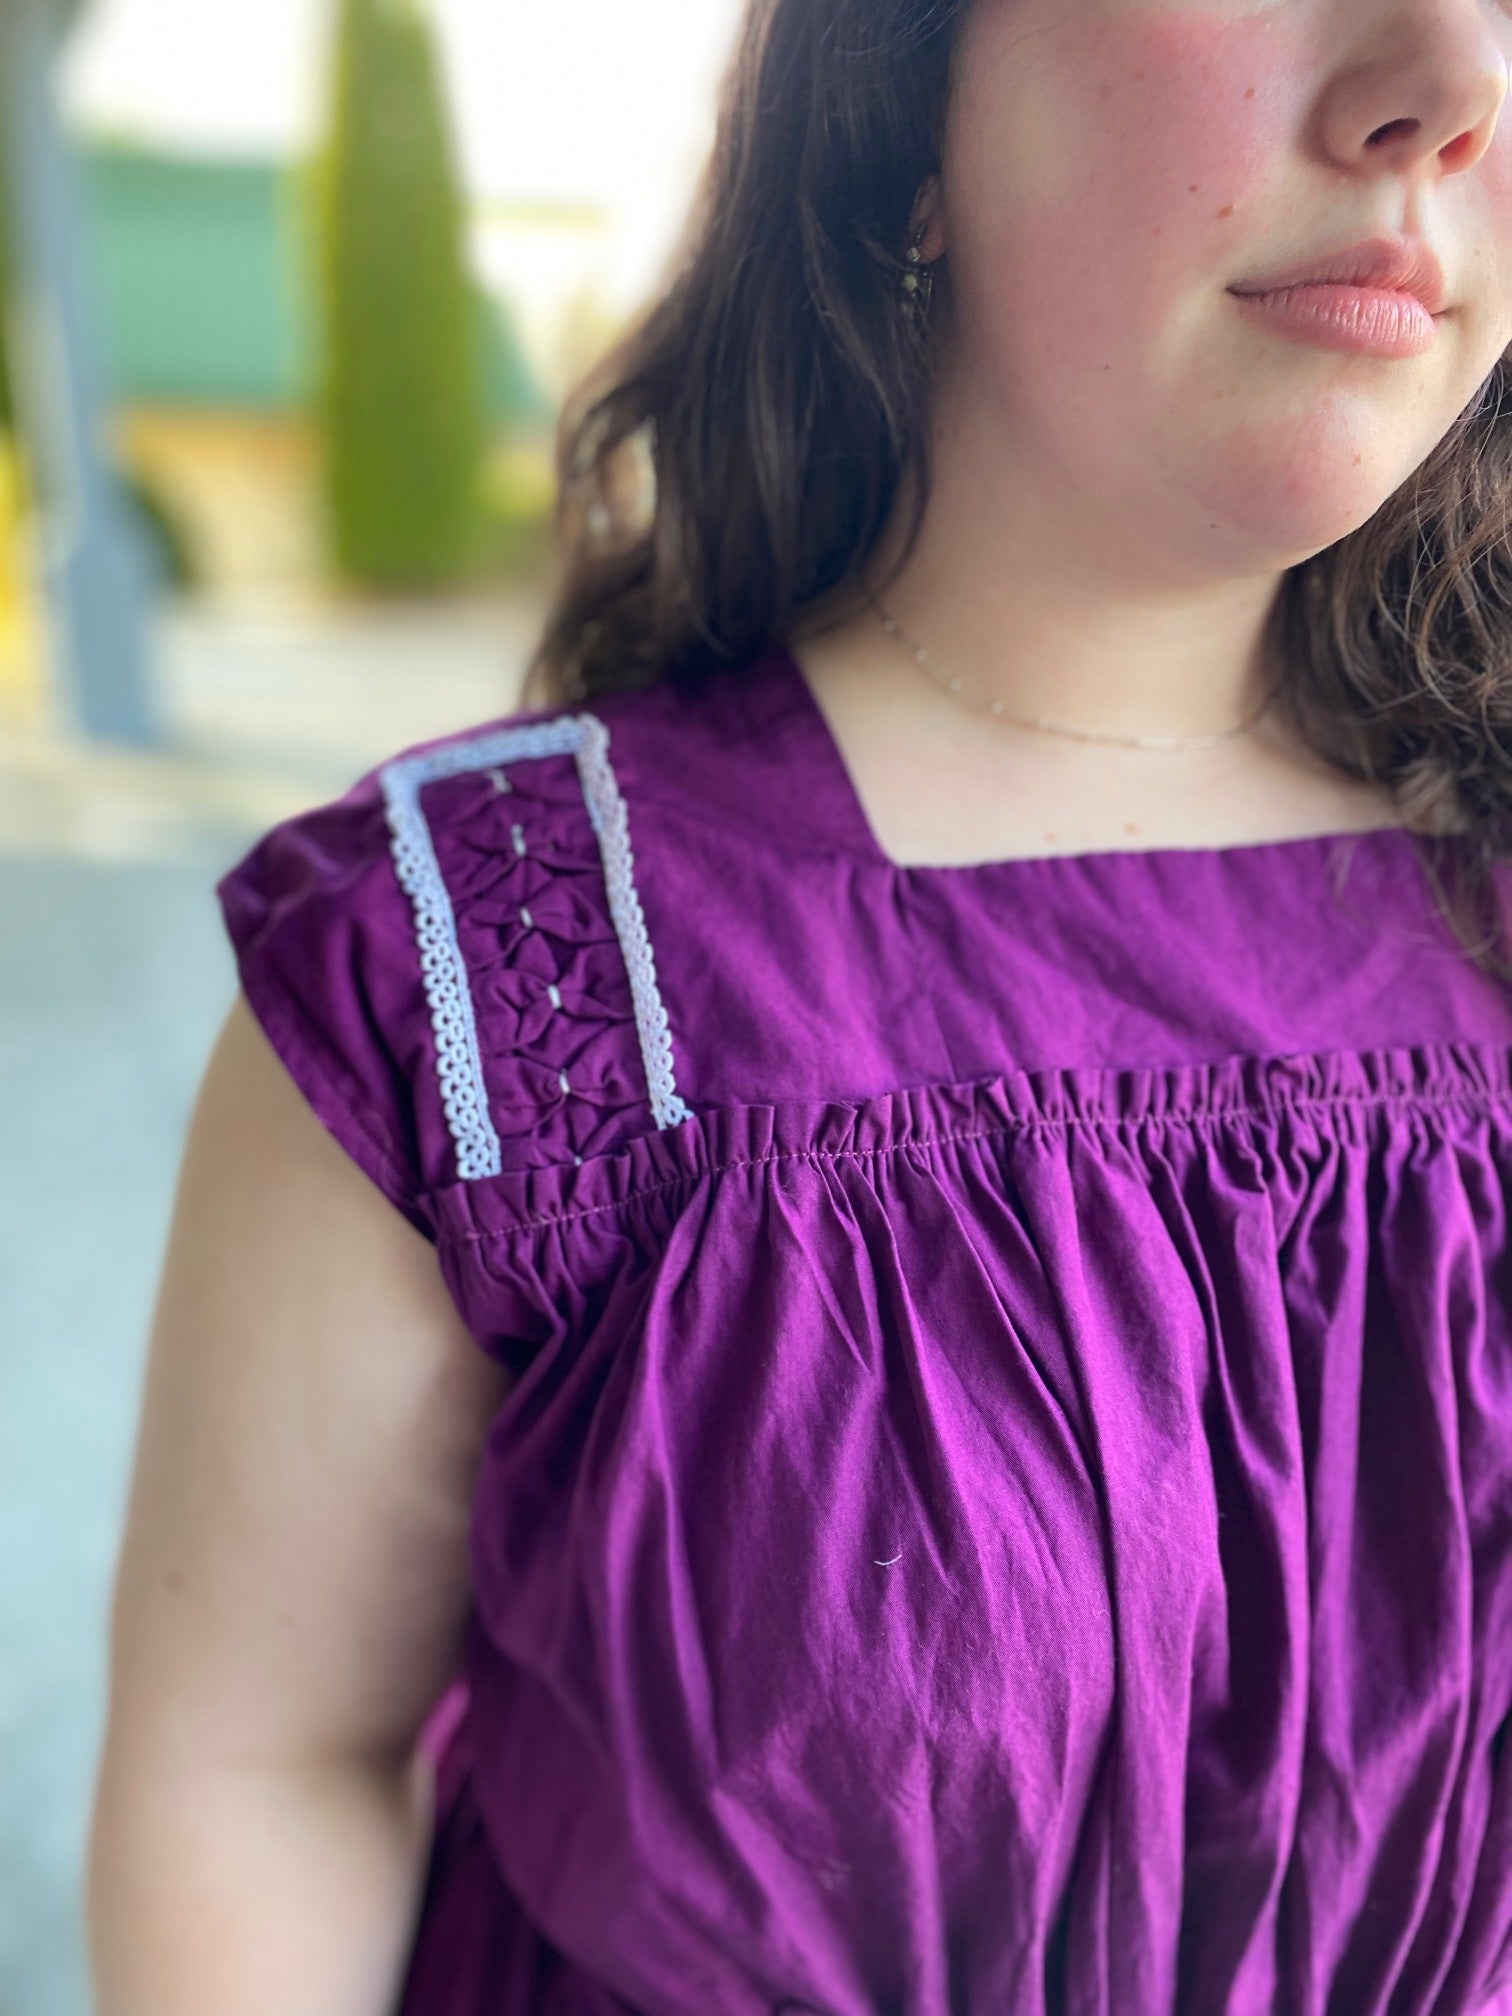 Young woman wearing a purple sleeveless dress with some embellished shoulder yoke.